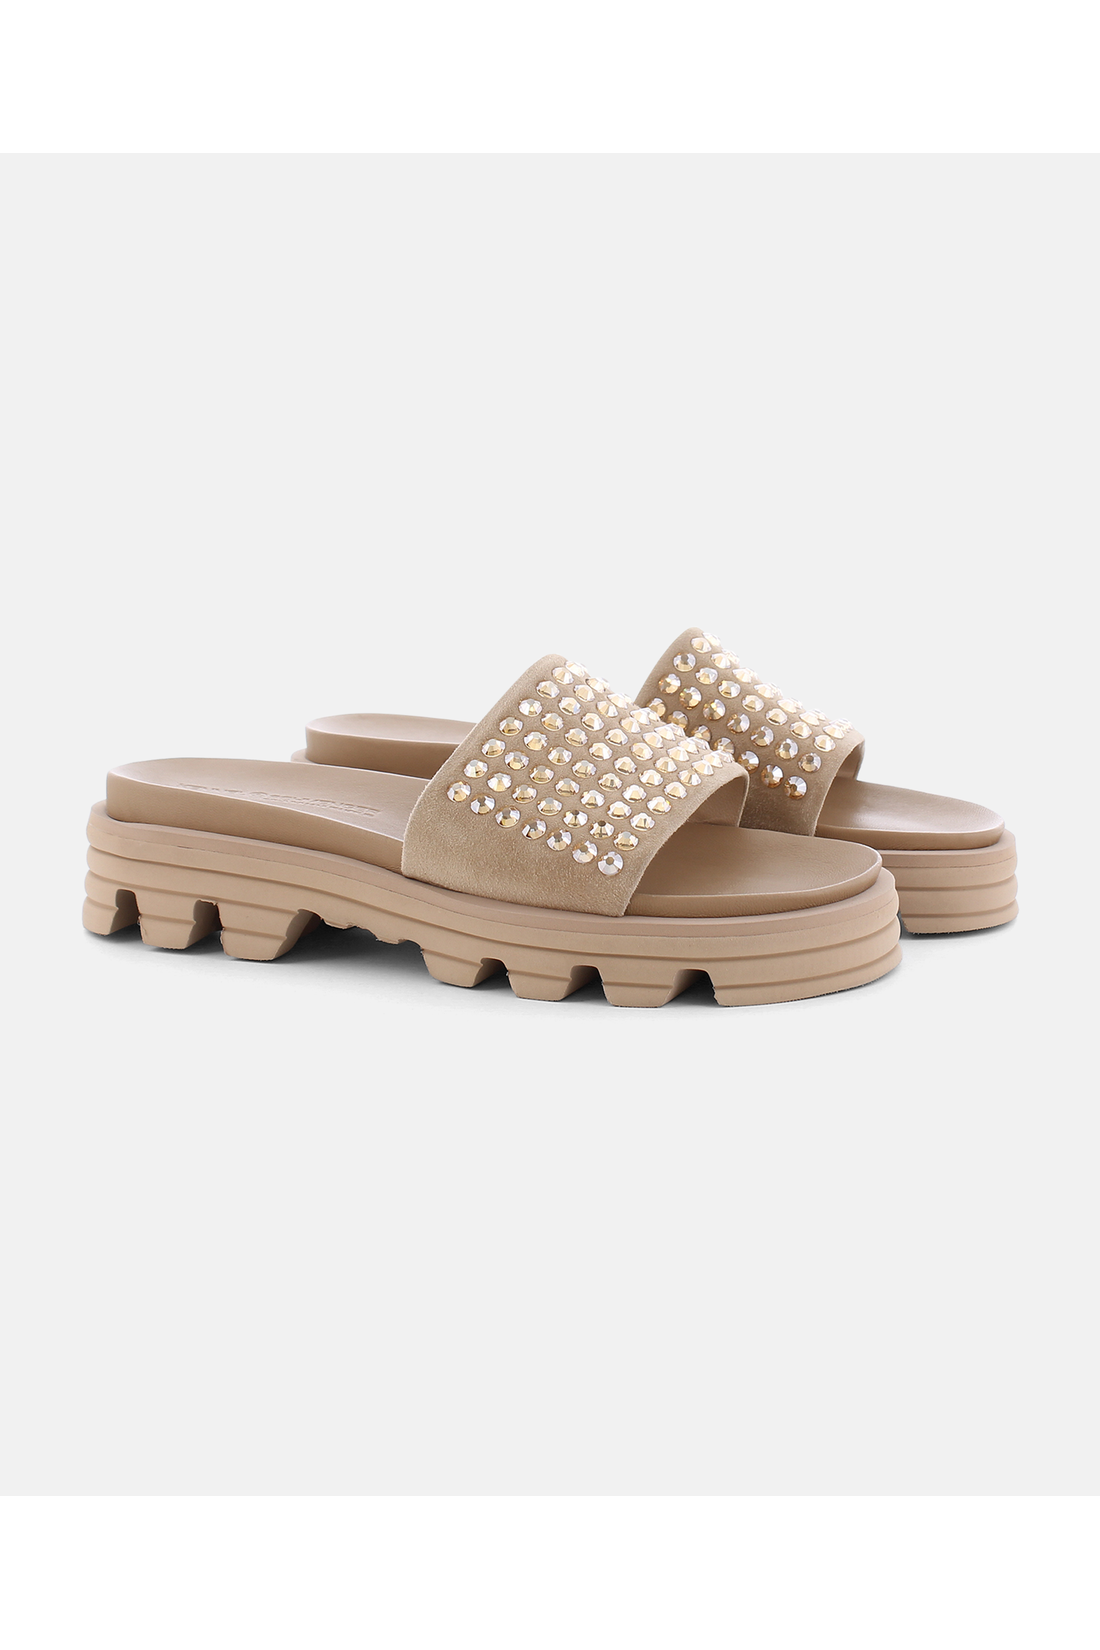 Kennel-Schmenger-OUTLET-SALE-ACT-Sandalen-2_5-35-Hellbraun-ARCHIVE-COLLECTION.png